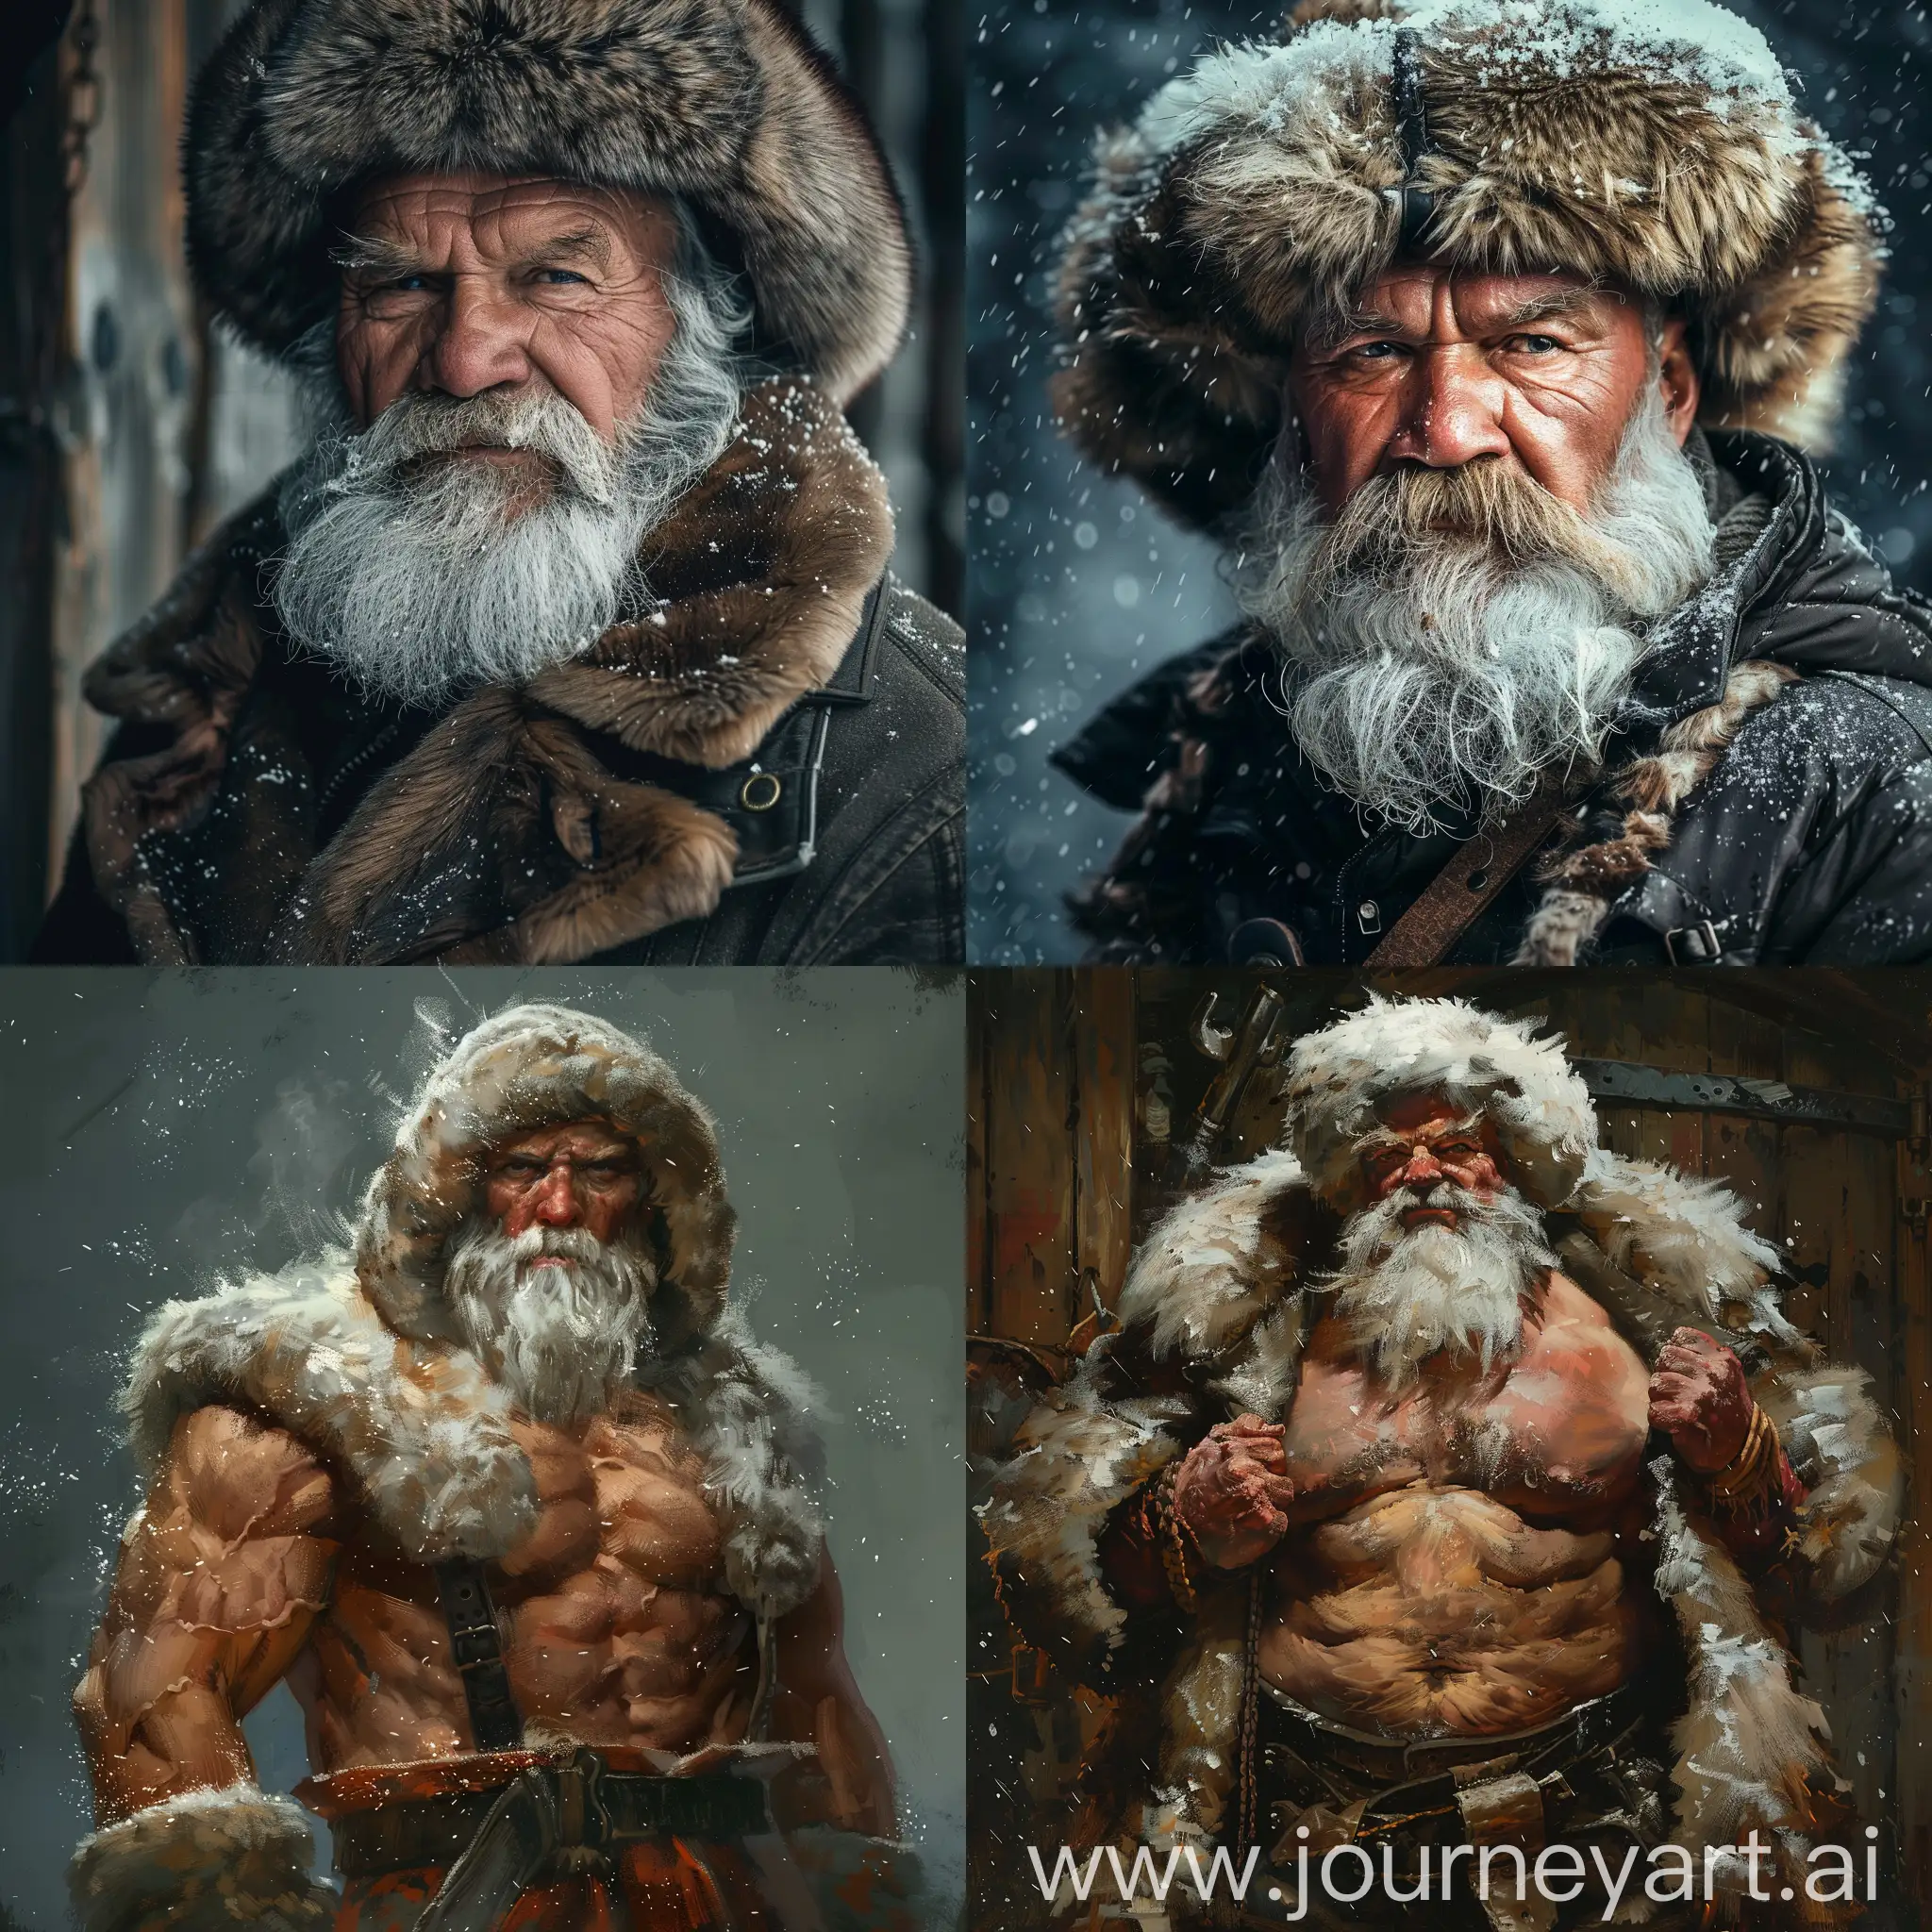 Strong-Russian-Grandfather-in-Ushanka-Hat-Portrait-of-Elderly-Man-with-Traditional-Headwear